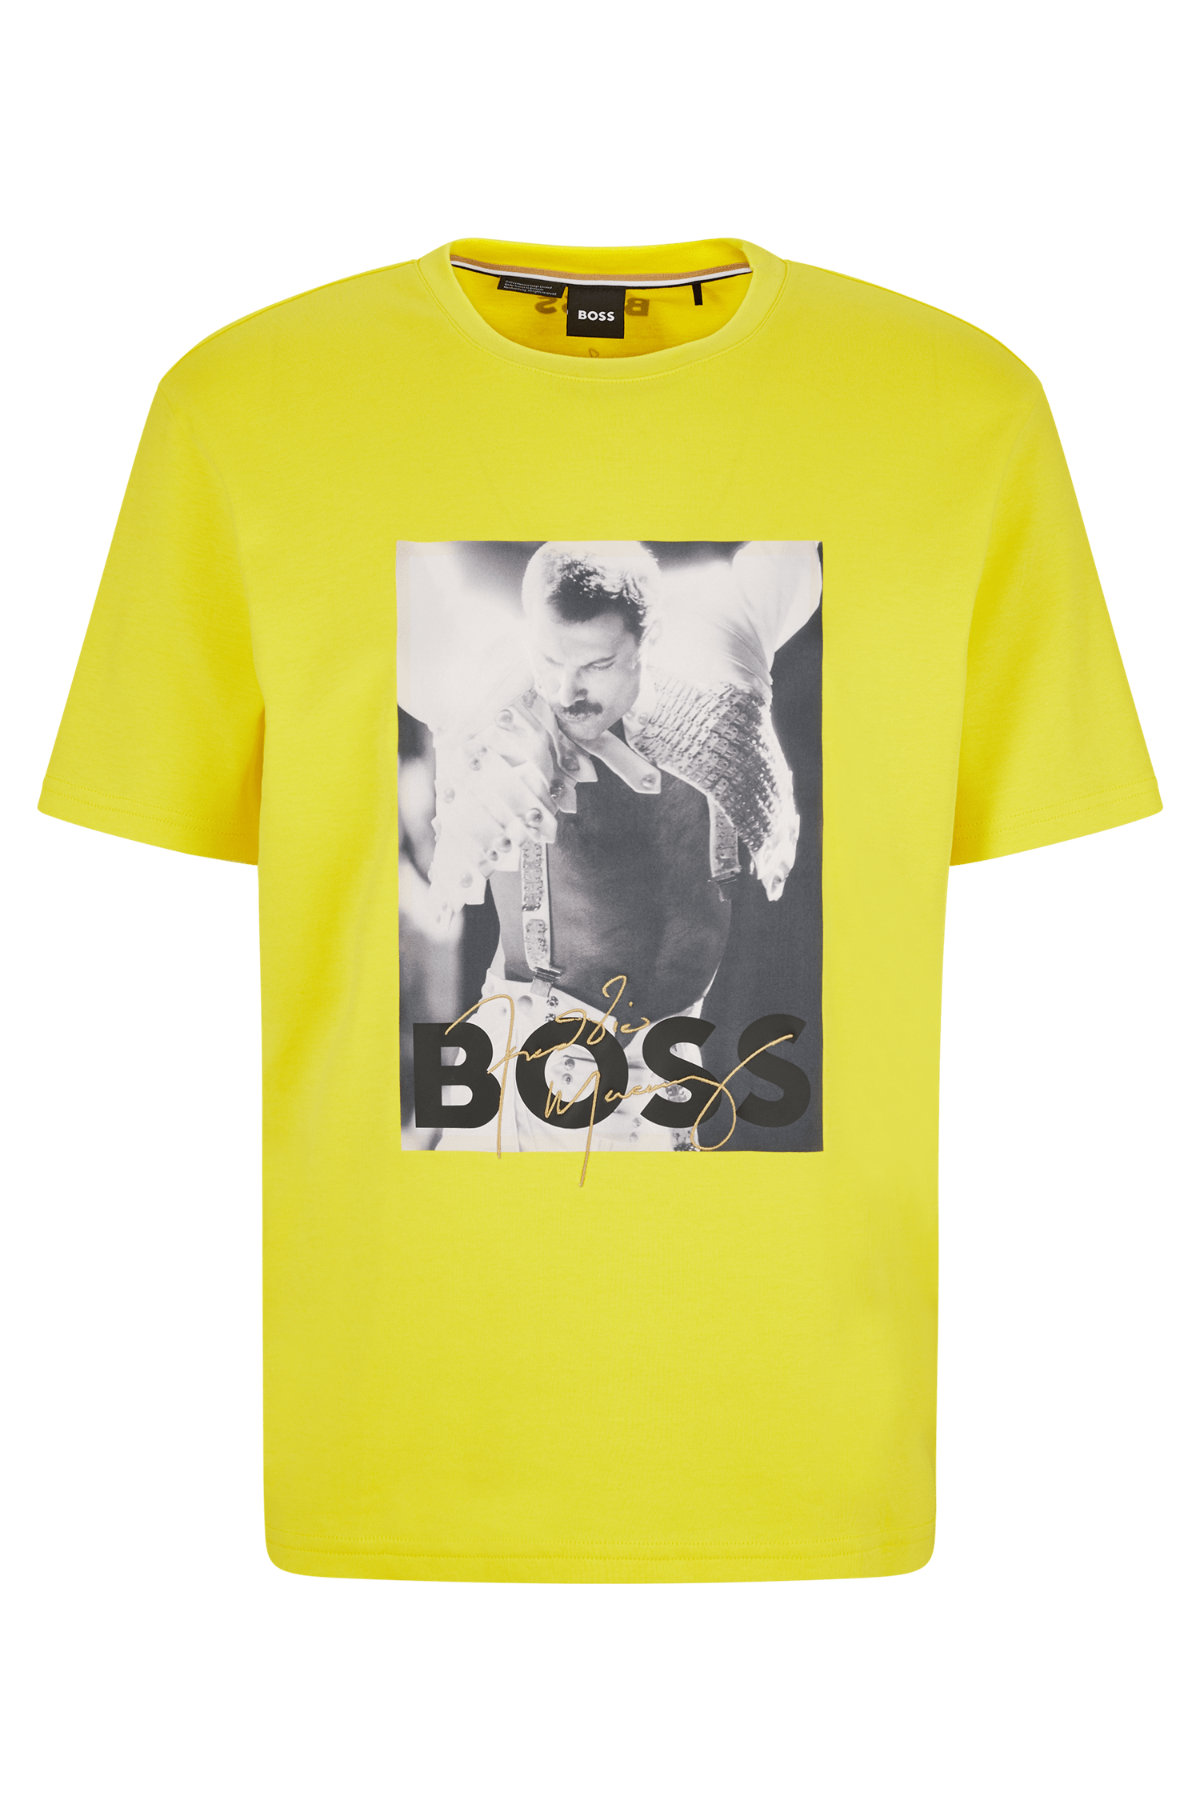 Unapologetically BOSS: A New Capsule Collection Inspired By The Legendary Freddie Mercury